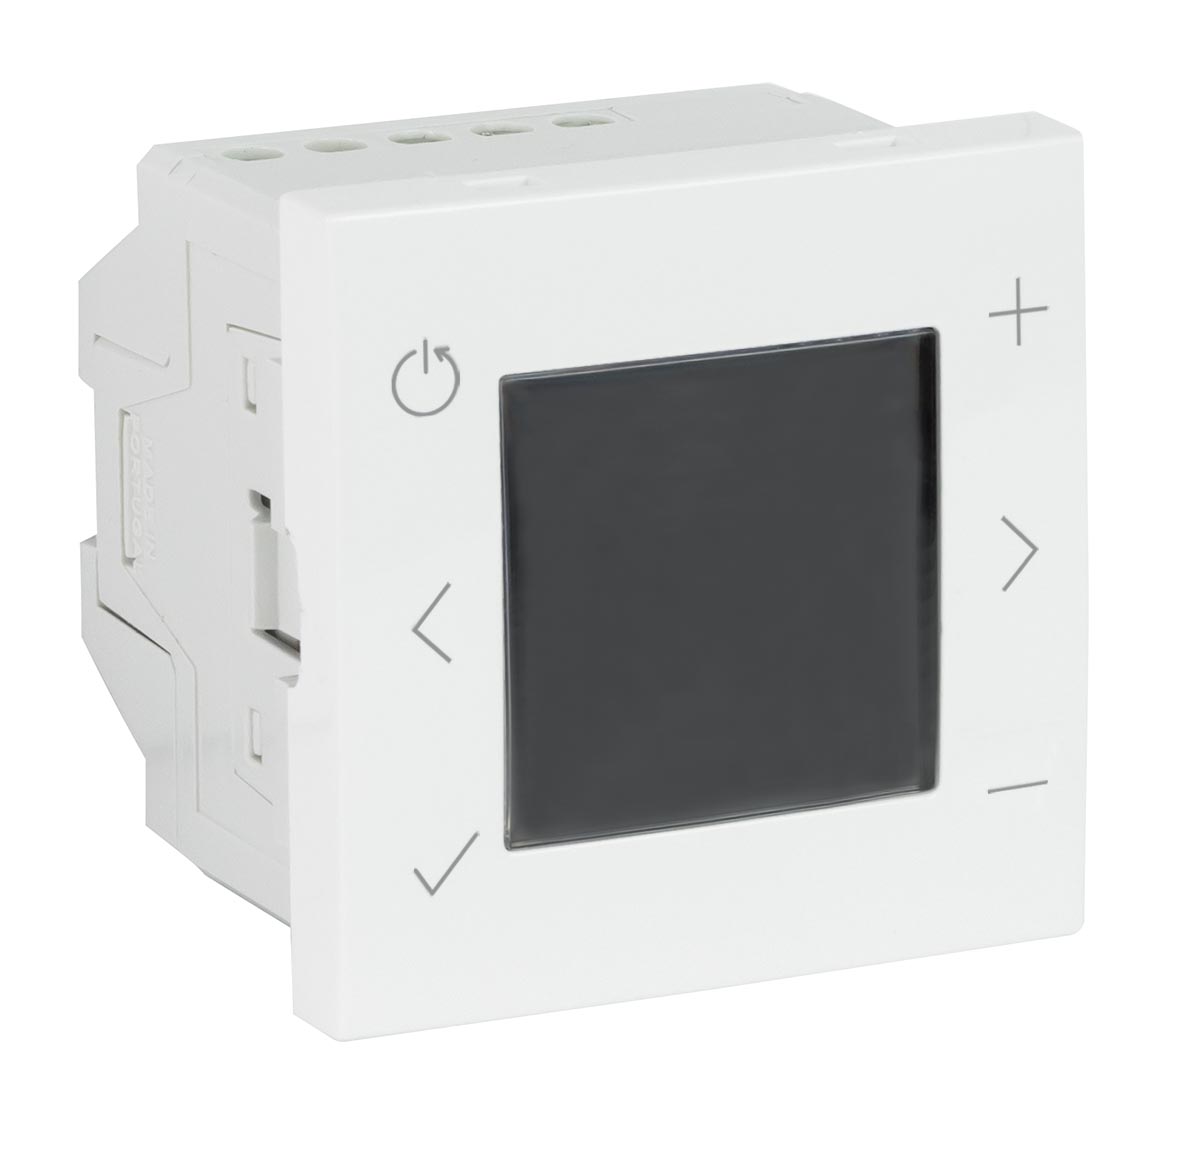 Control Unit FM with Display and Bluetooth 12 V - 2 Modules